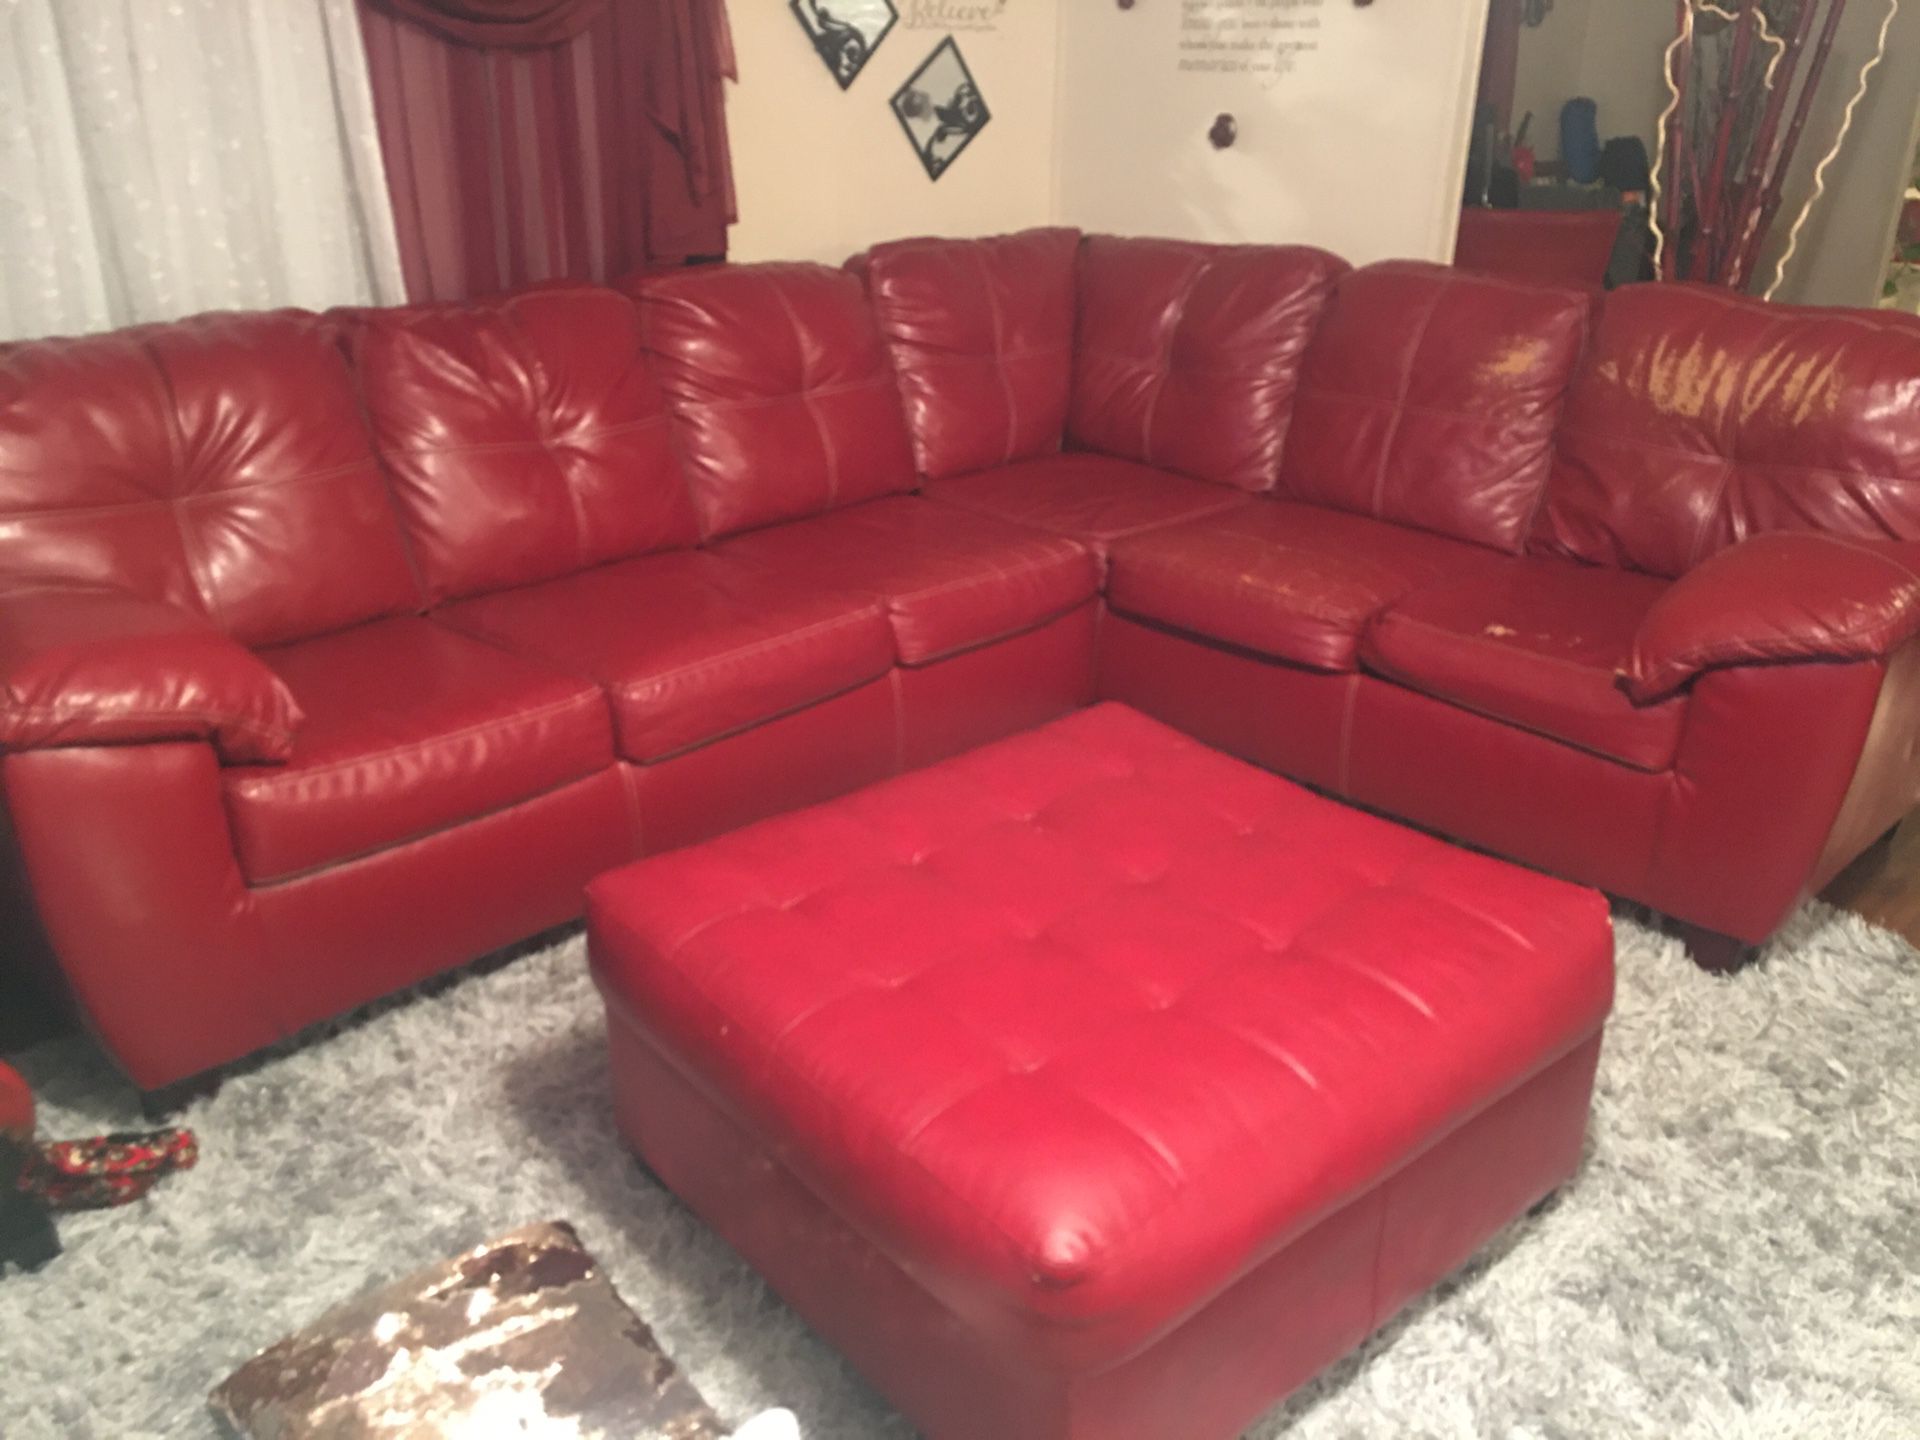 Red sectional and ottoman included